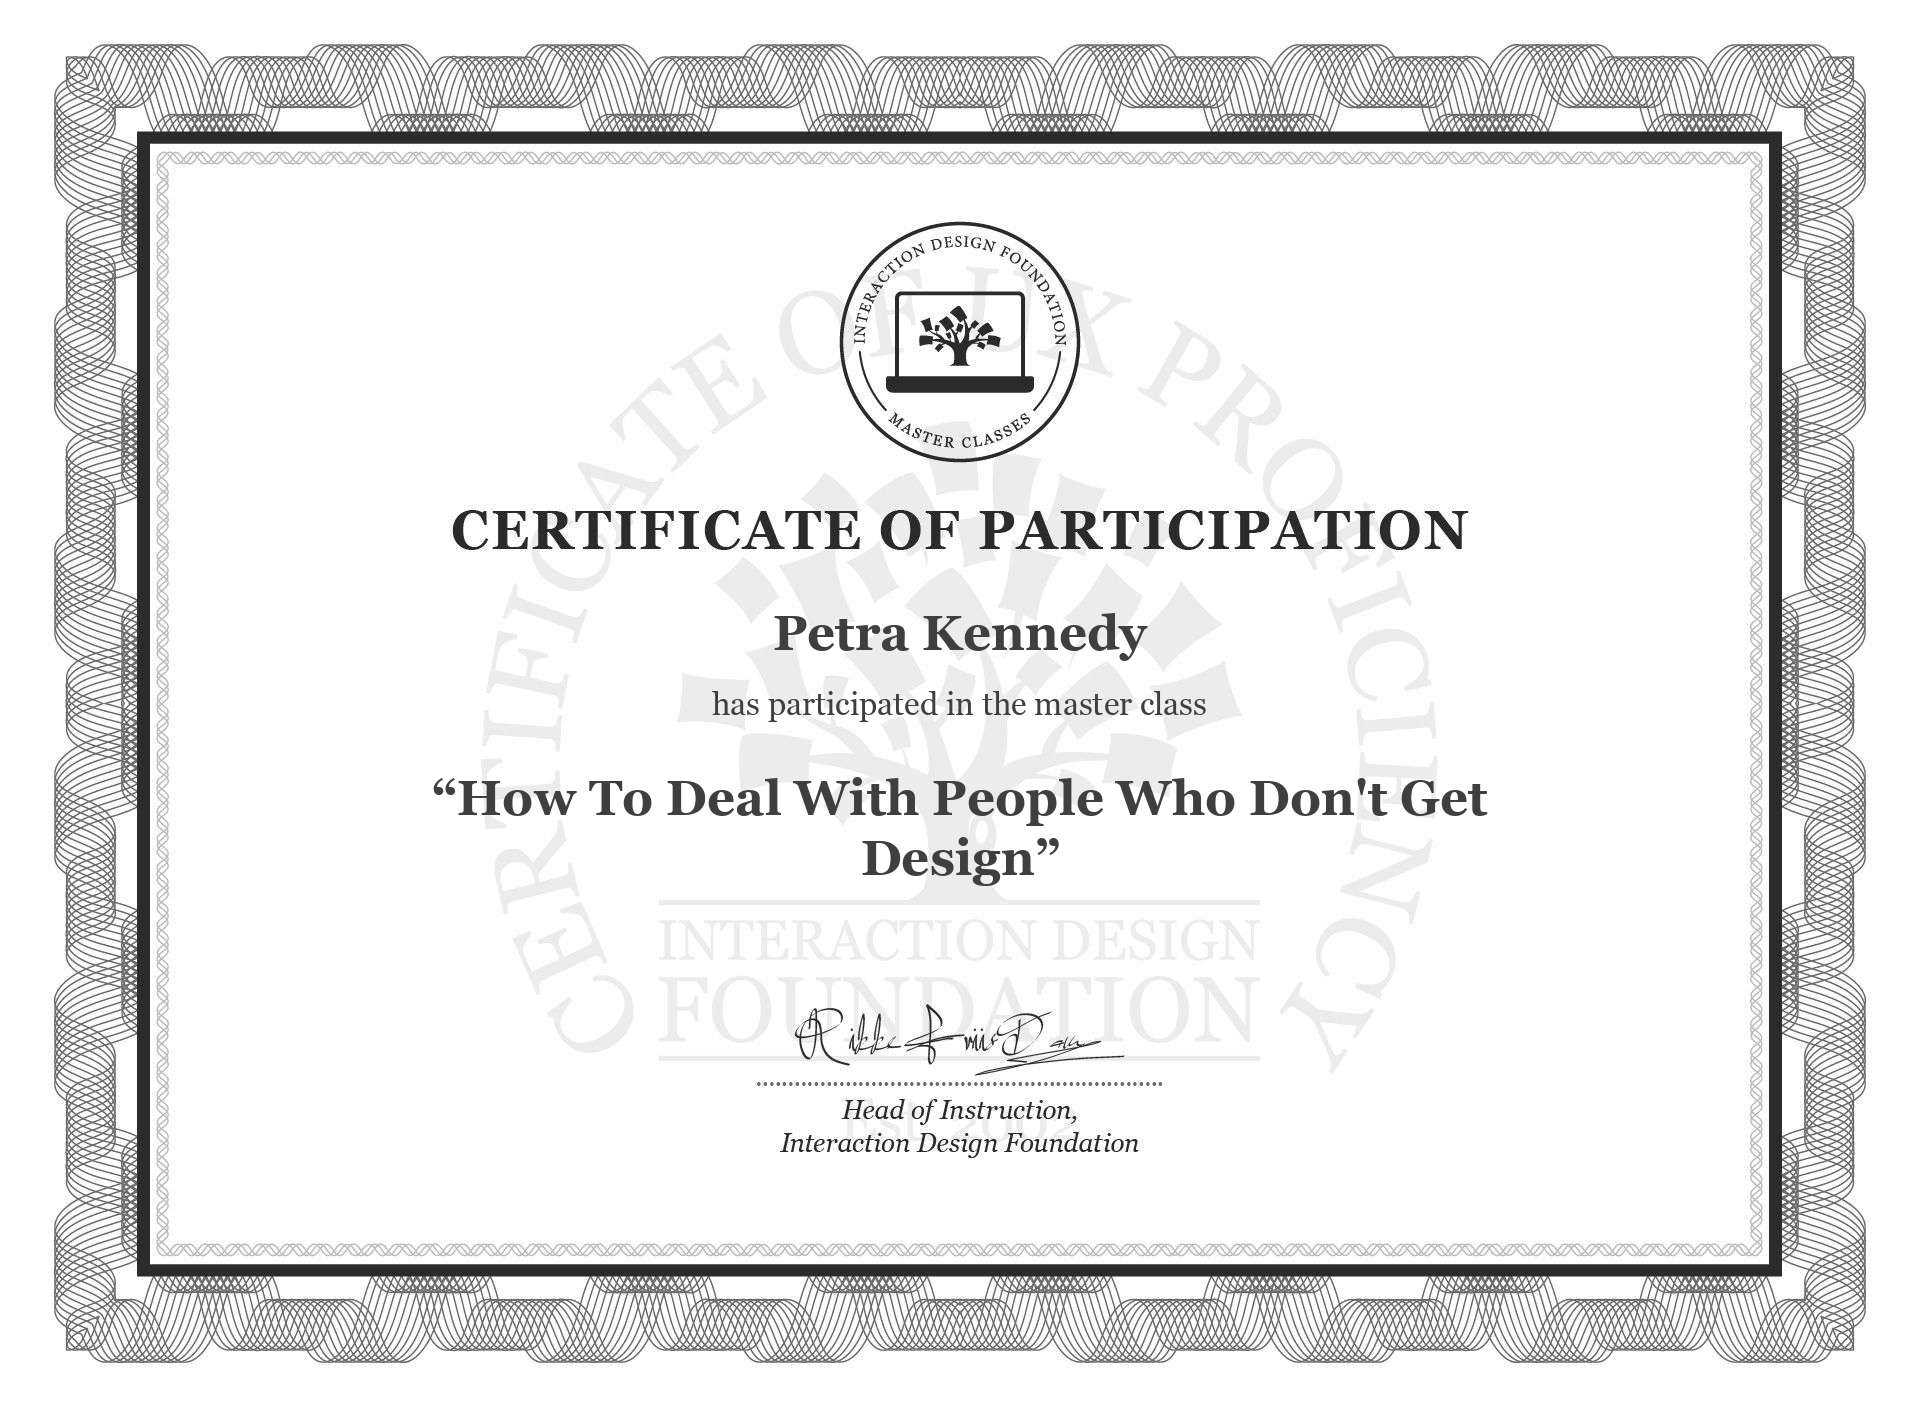 Masterclass Certificate How To Deal With People Who Don't Get Design